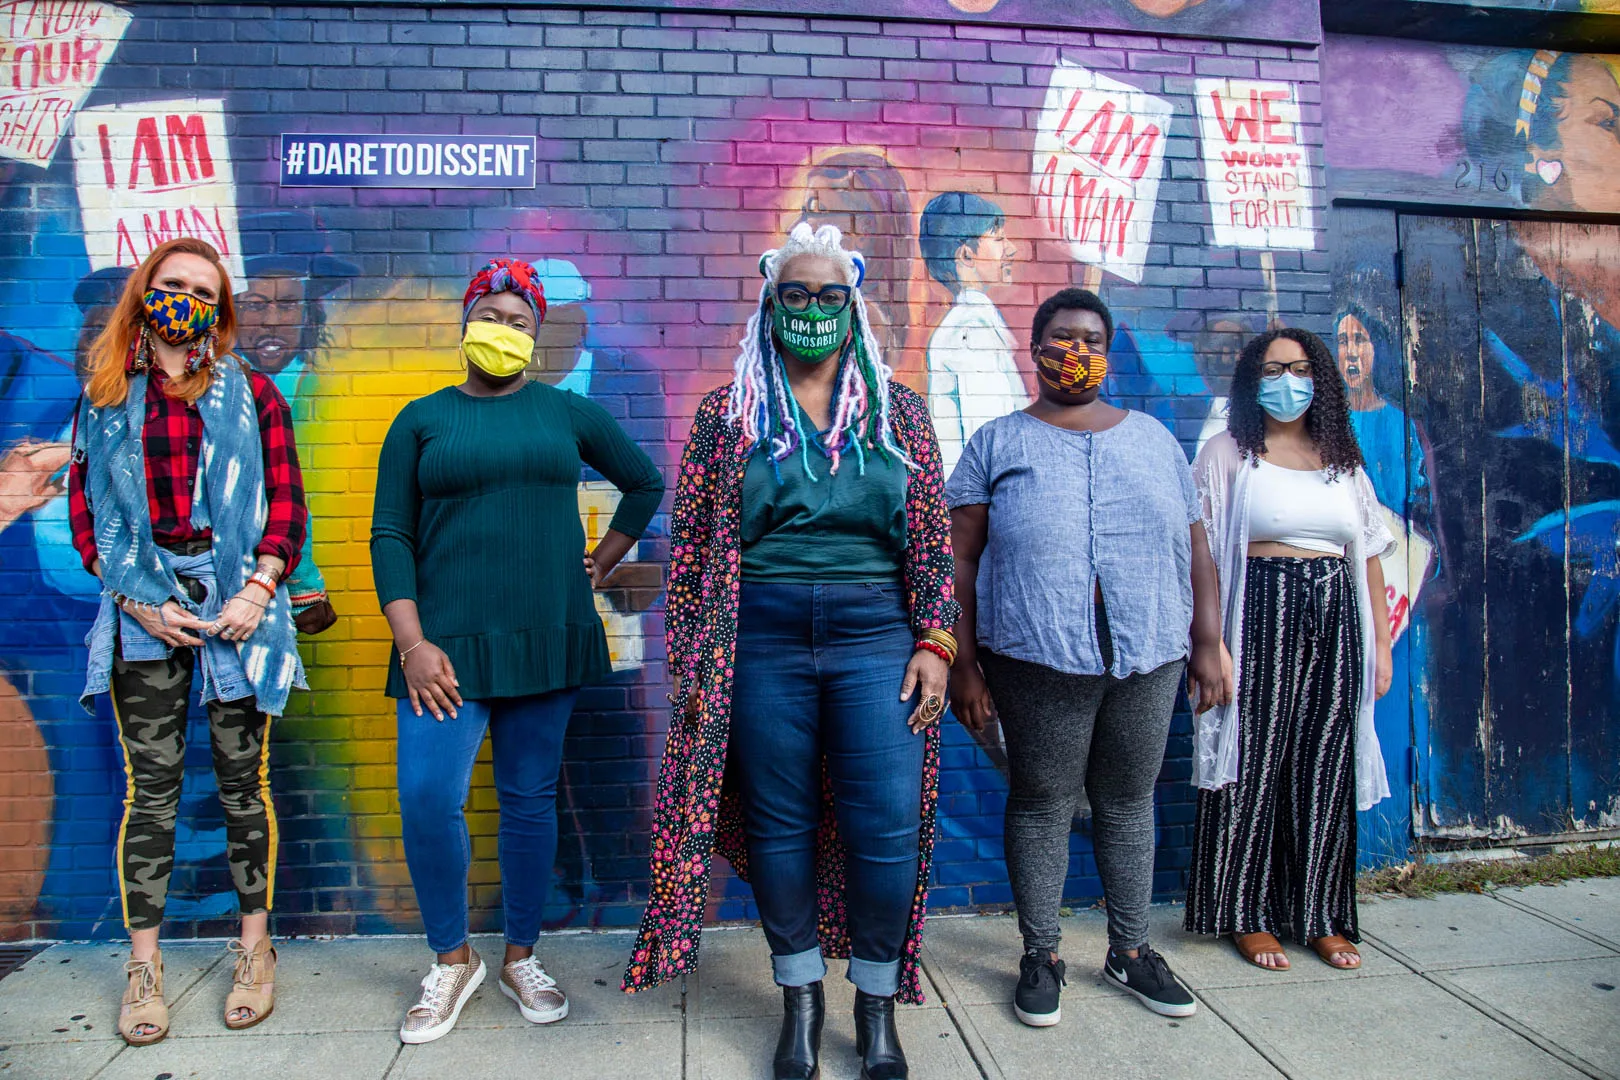 Five people in colorful clothing and face masks standing in front of a wall painted with images of people holding protest signs.